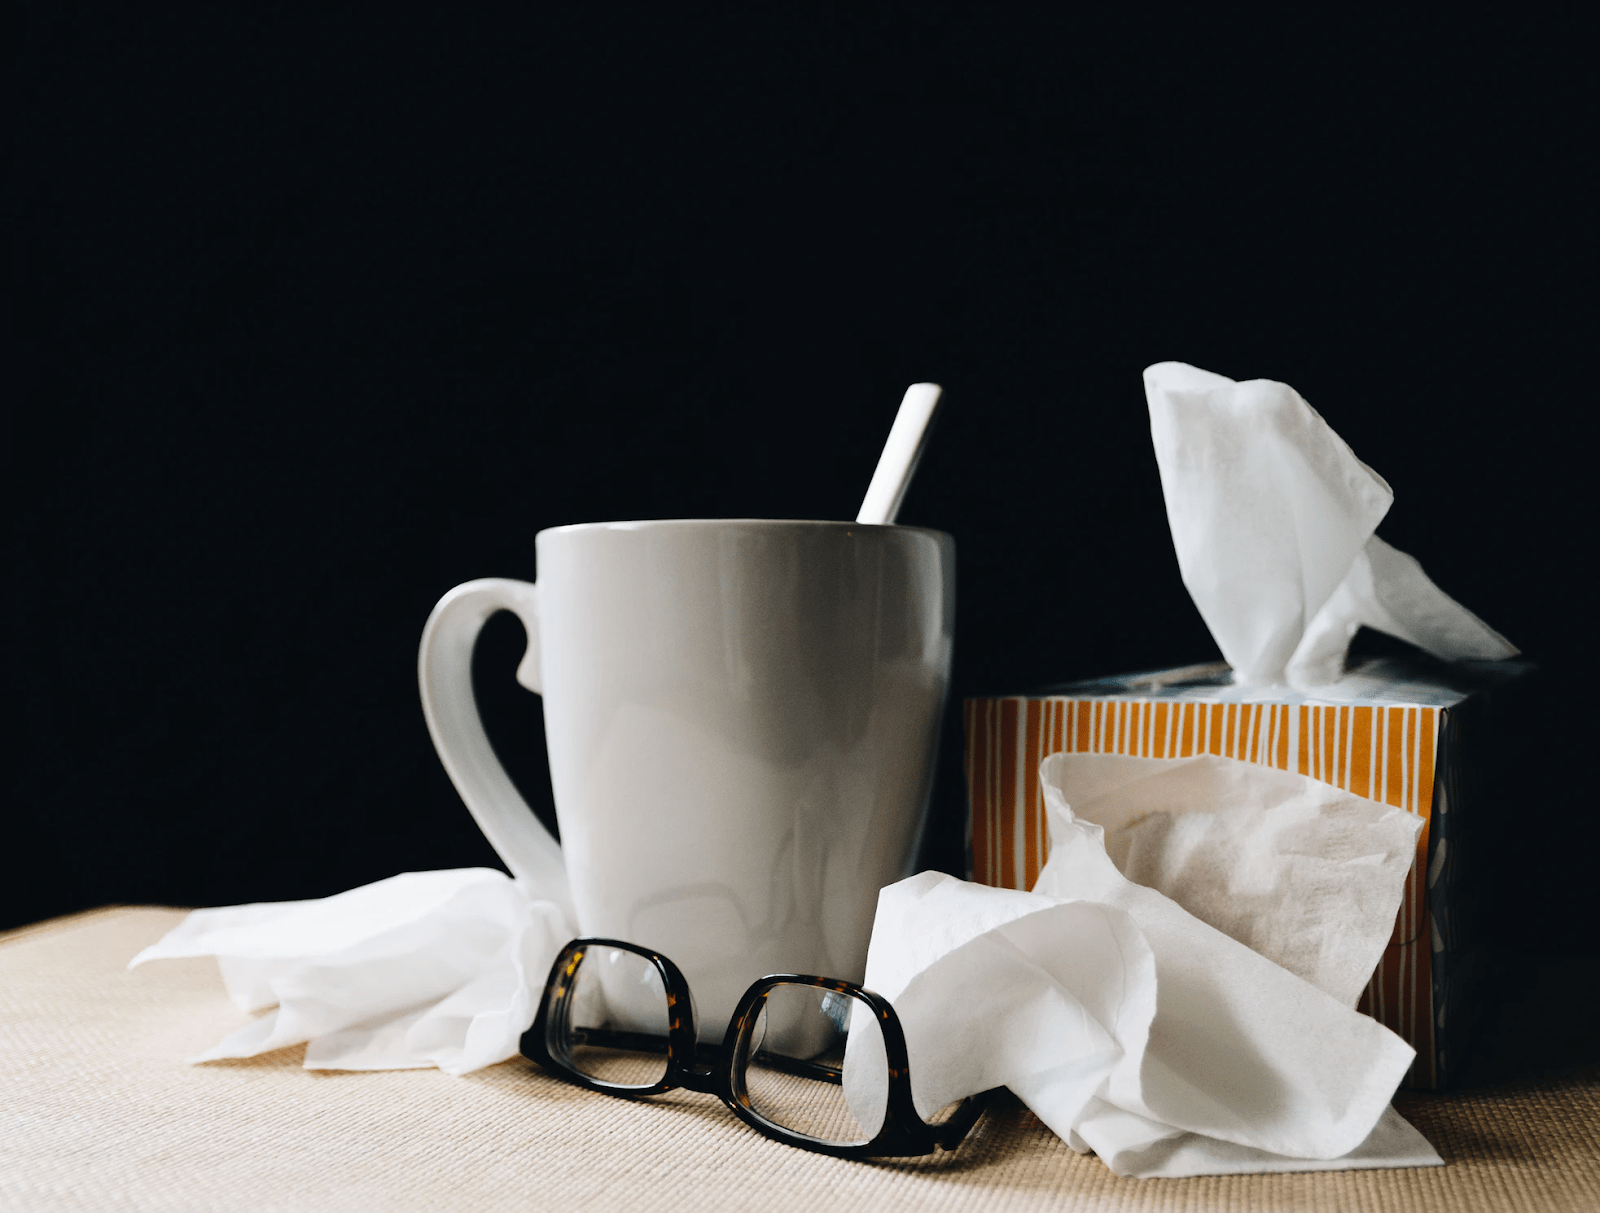 a mug, eyeglasses, tissues, and used tissues on a table